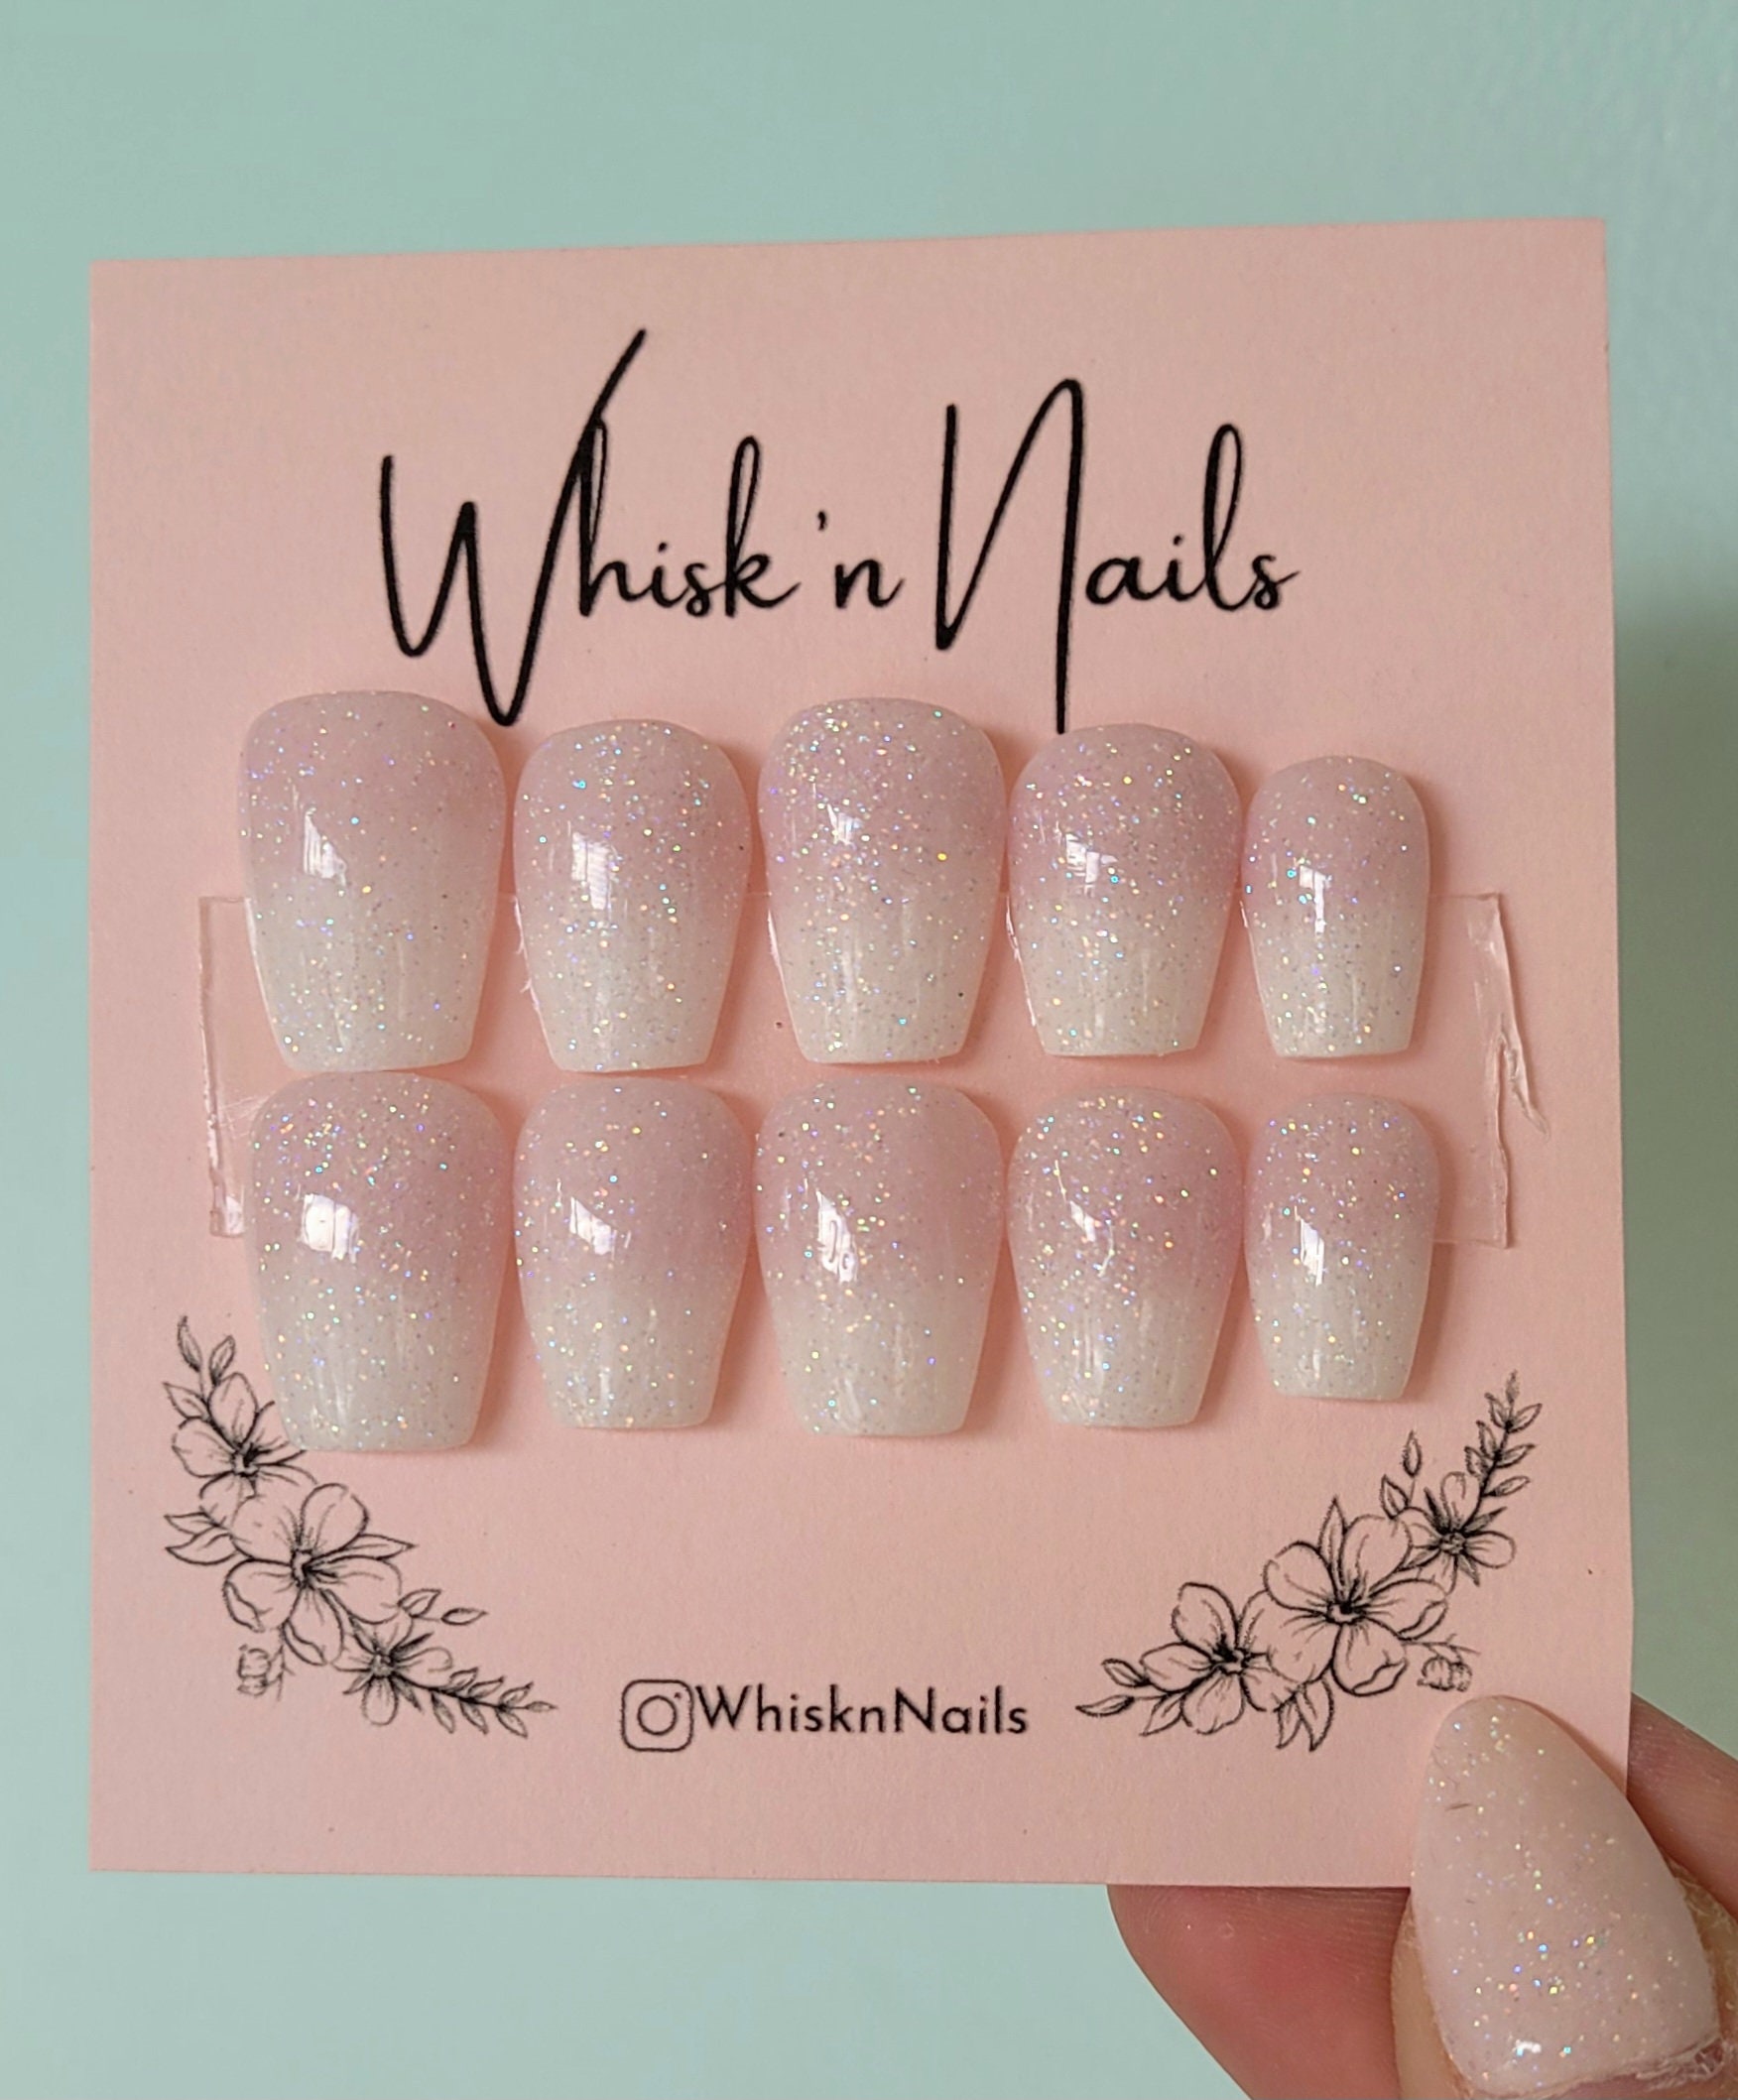 Hanna's Nails - Soft White Powder with Gold Flakes on